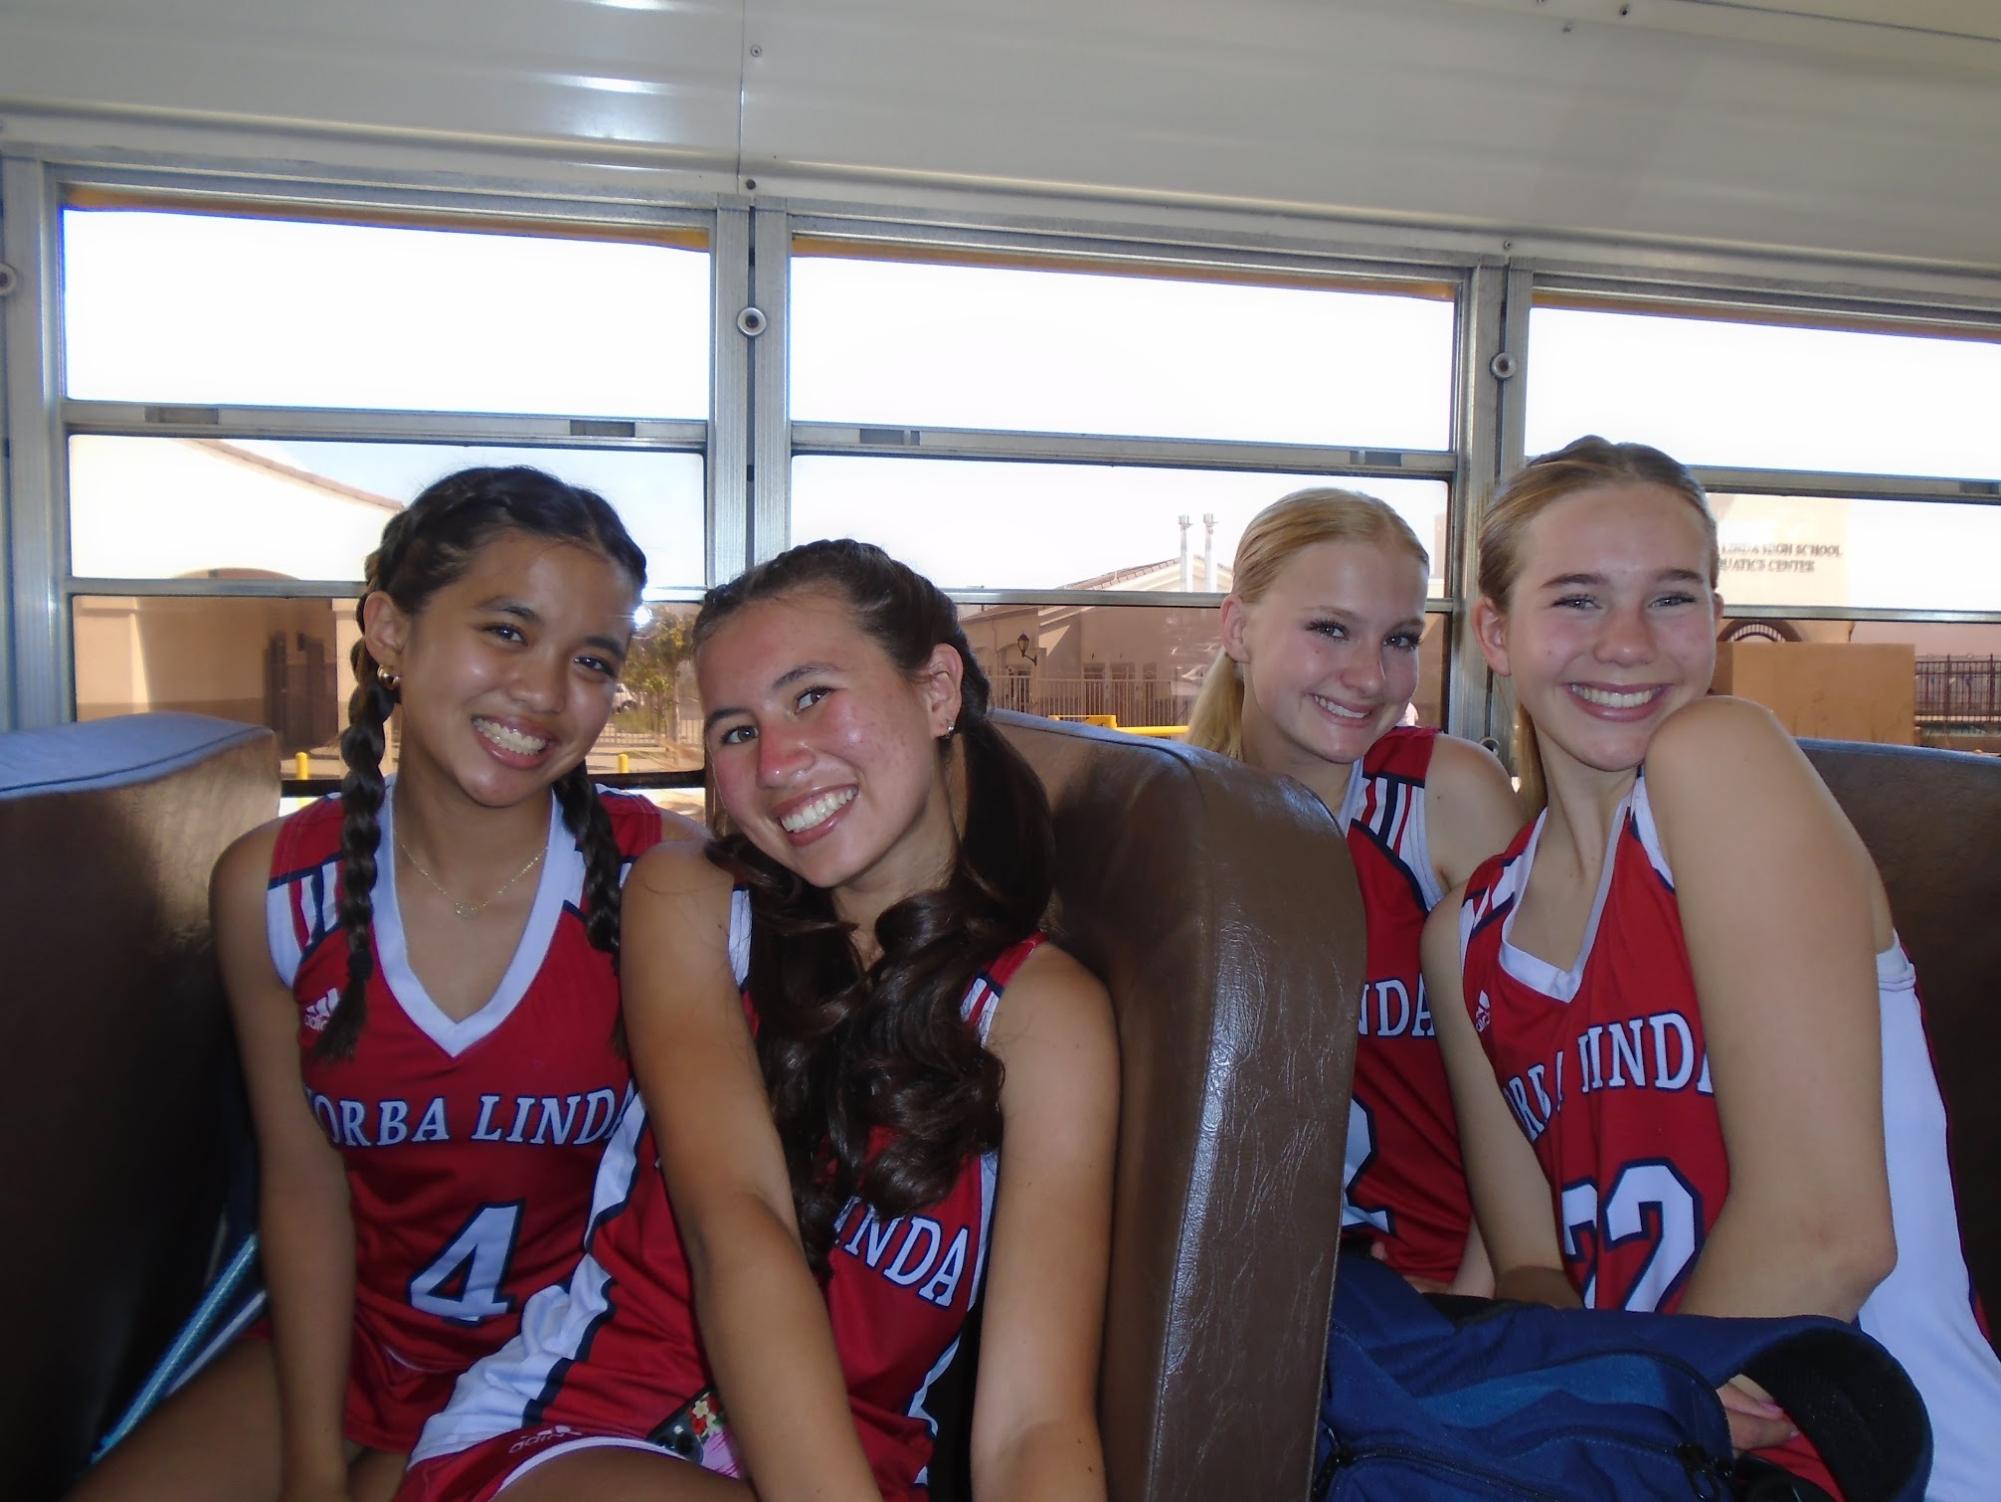  A memory I captured throughout last year’s lacrosse season of my teammates, Lauren Urquico(11), Kailey Dinh (11), Makenna Maloof (10), and Mckenzi Reiter (10) on one of our bus rides to a game.